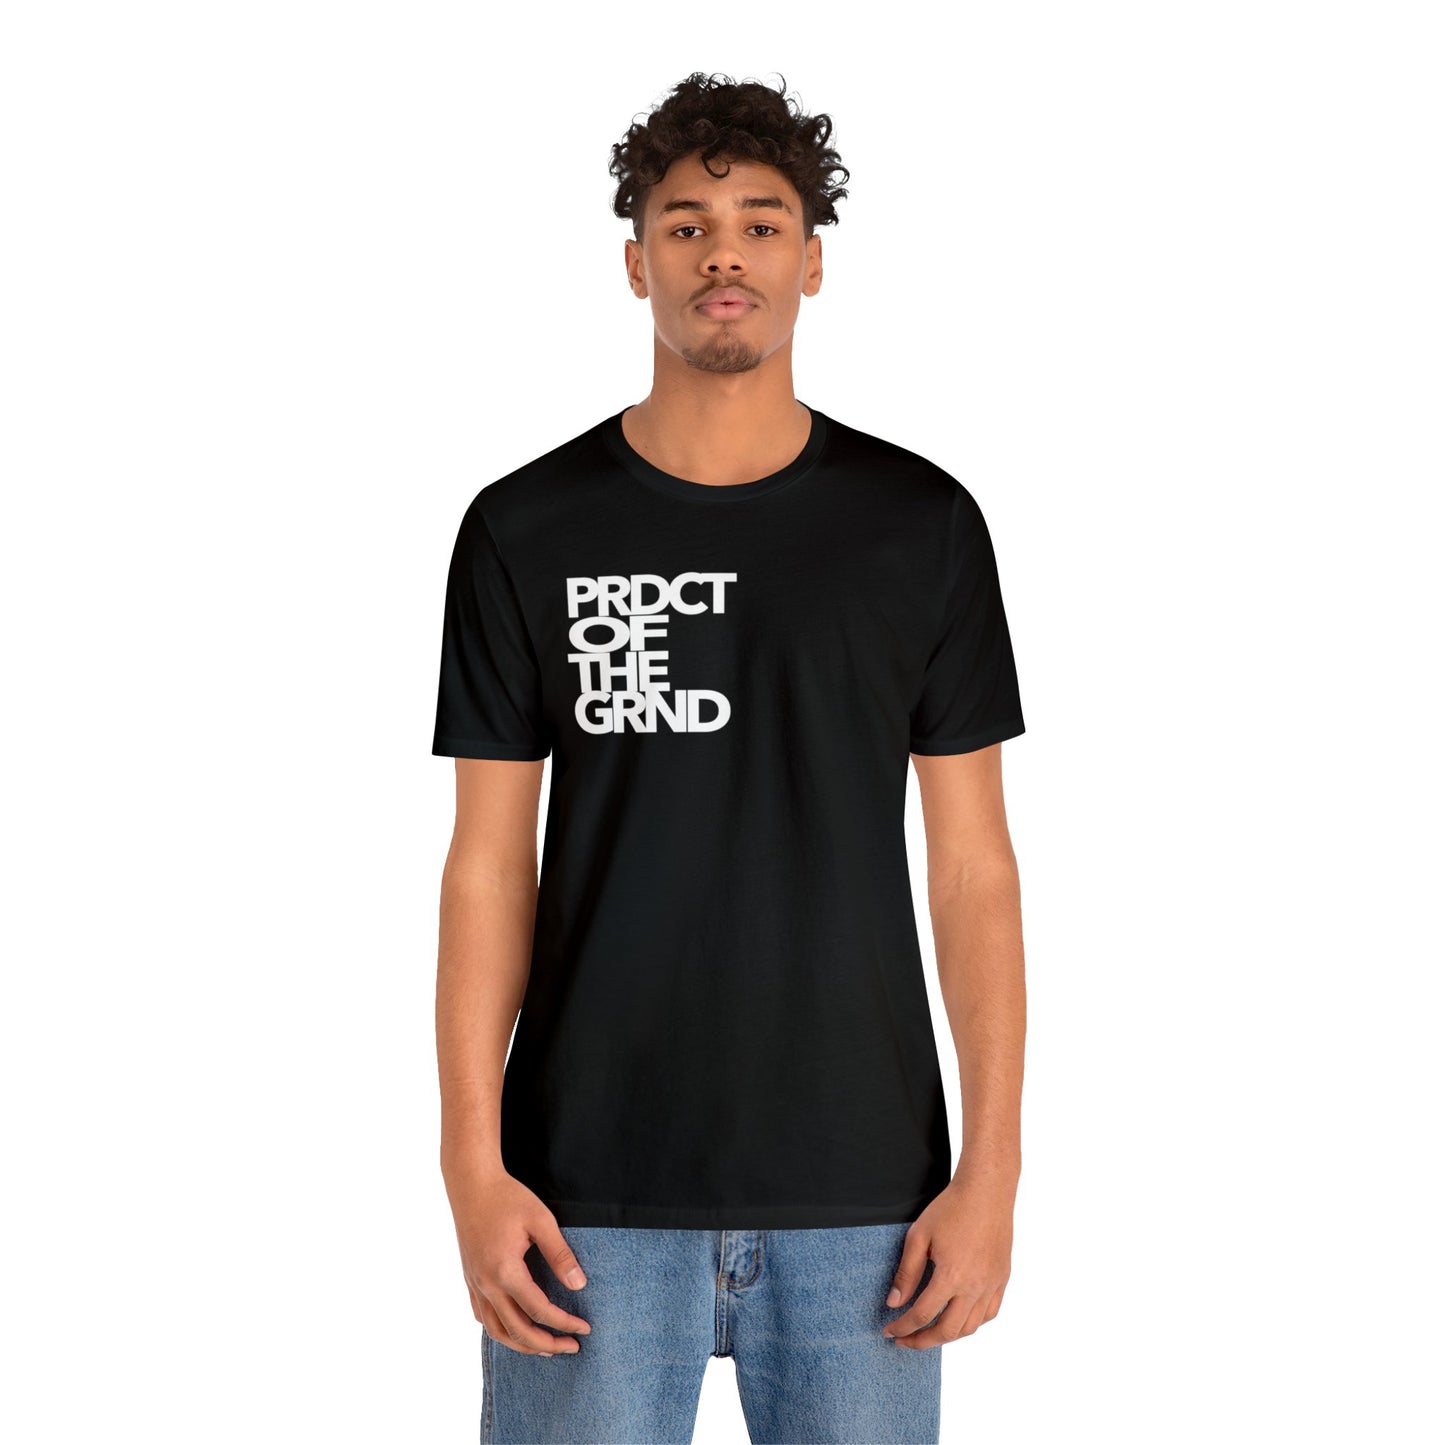 "Product of the Grind" Tee